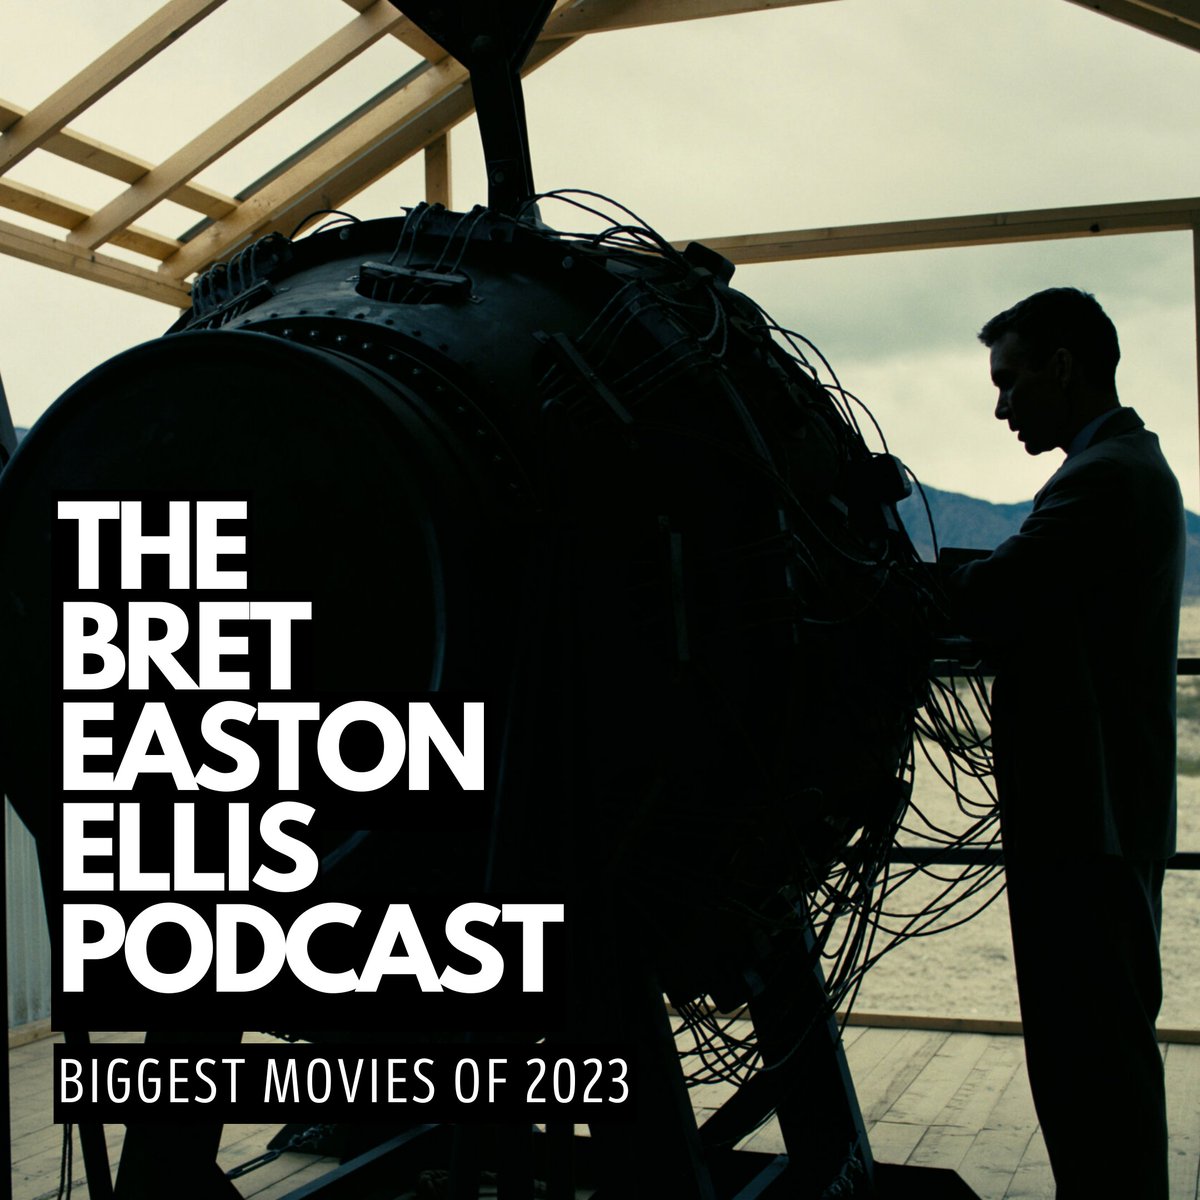 The Bret Easton Ellis Podcast - Season 8, Episode 3 - Biggest Movies of 2023 and Listener Q+A. bit.ly/bee2023recap